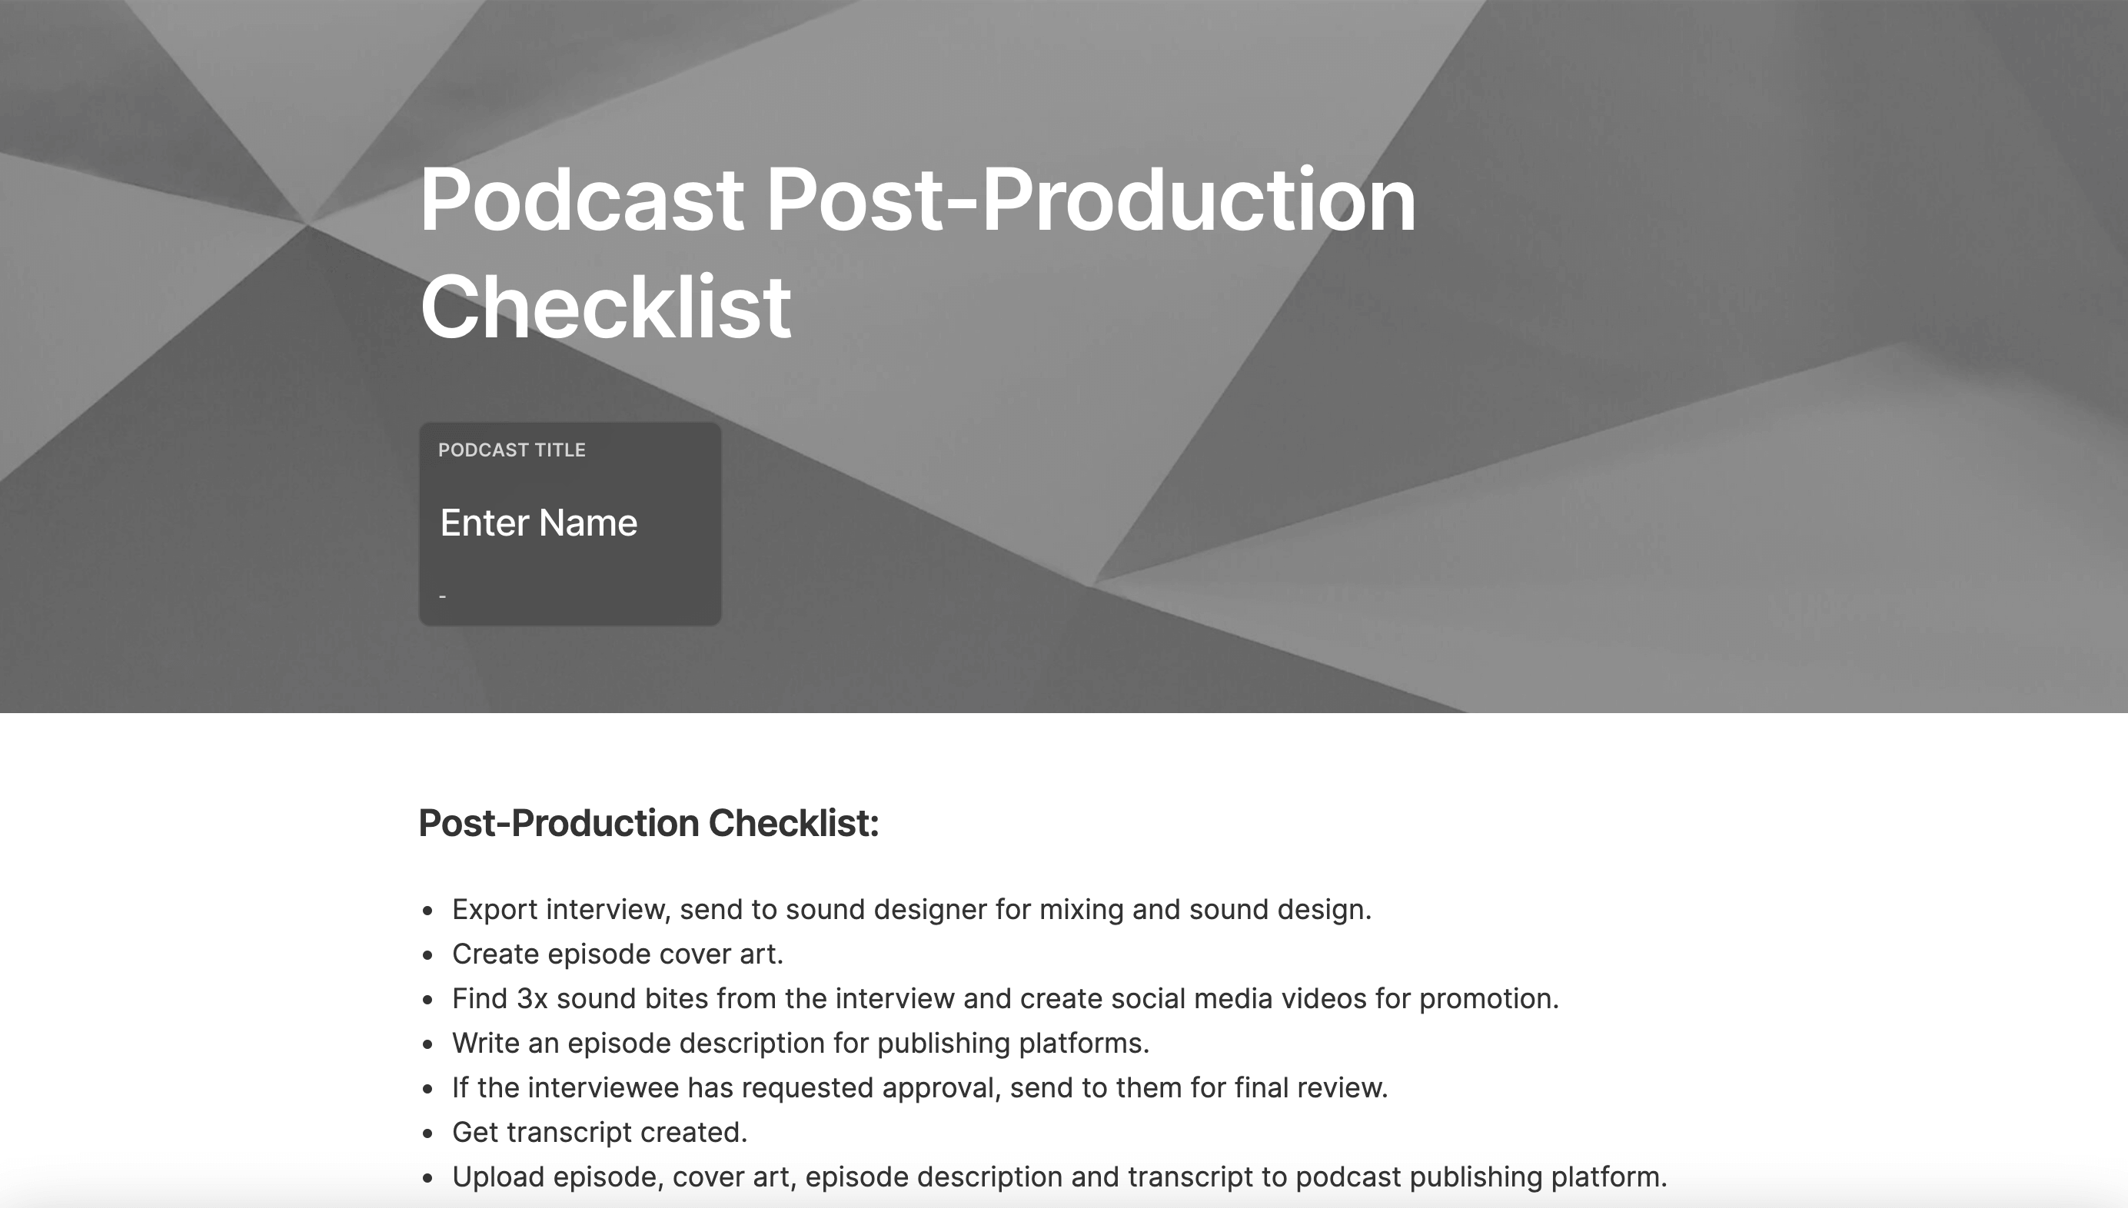 https://3389140.fs1.hubspotusercontent-na1.net/hubfs/3389140/podcast%20post-production%20checklist%20cover.png